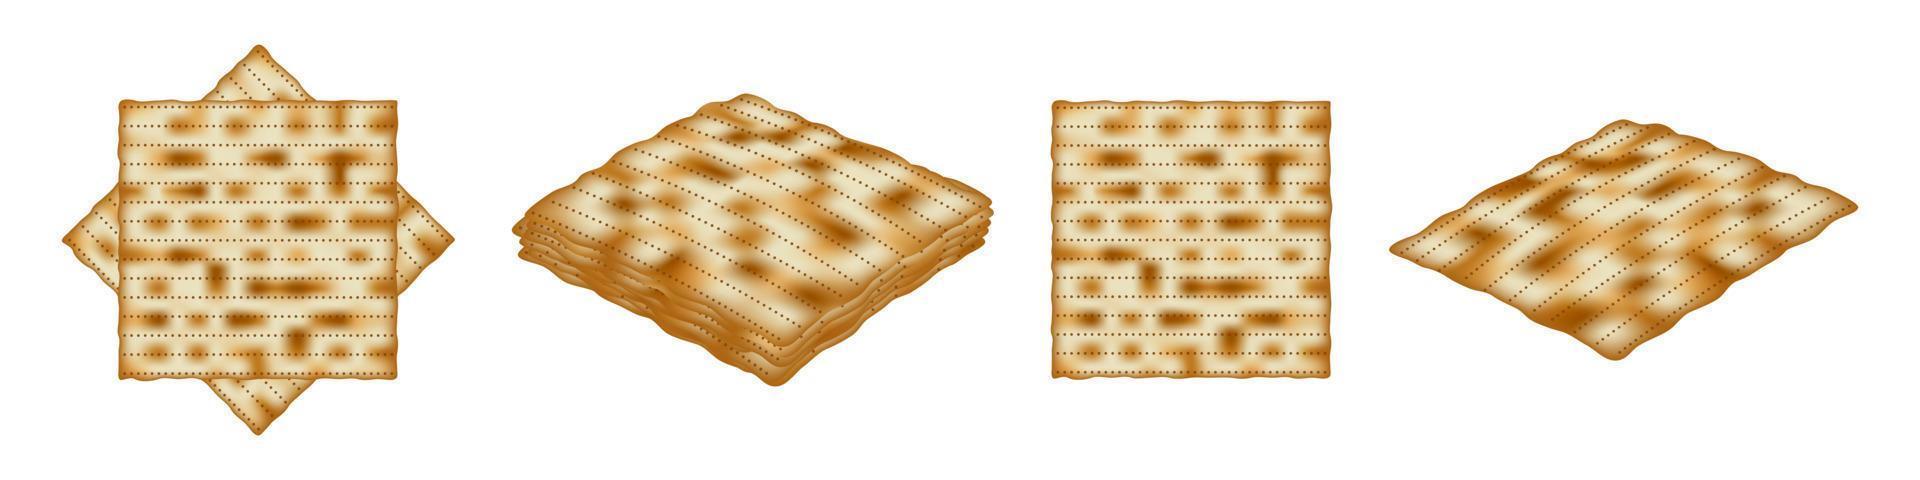 Matzo for Passover, isolated on white in different positions. Matzoh, unleavened bread is a symbol of the Jewish holiday Pesach. Vector illustration.